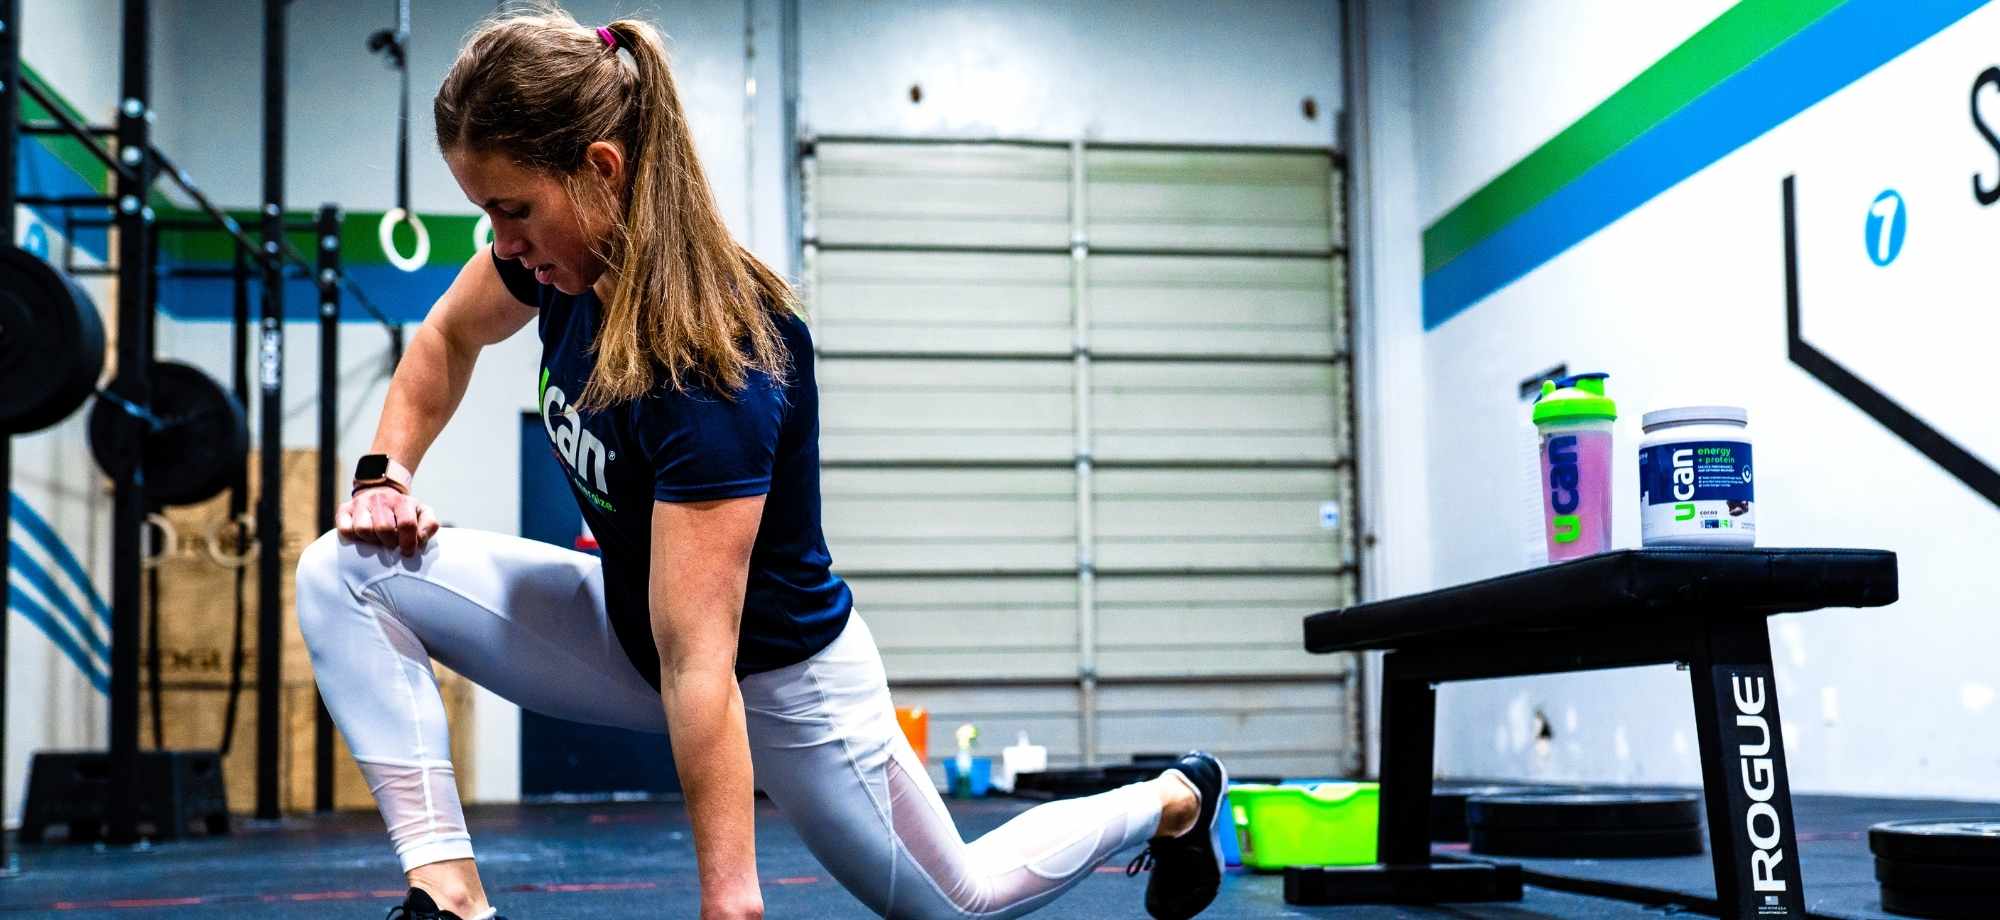 Beyond Caffeine and Pre-Workout: Why Top CrossFit Athletes are Turning to UCAN